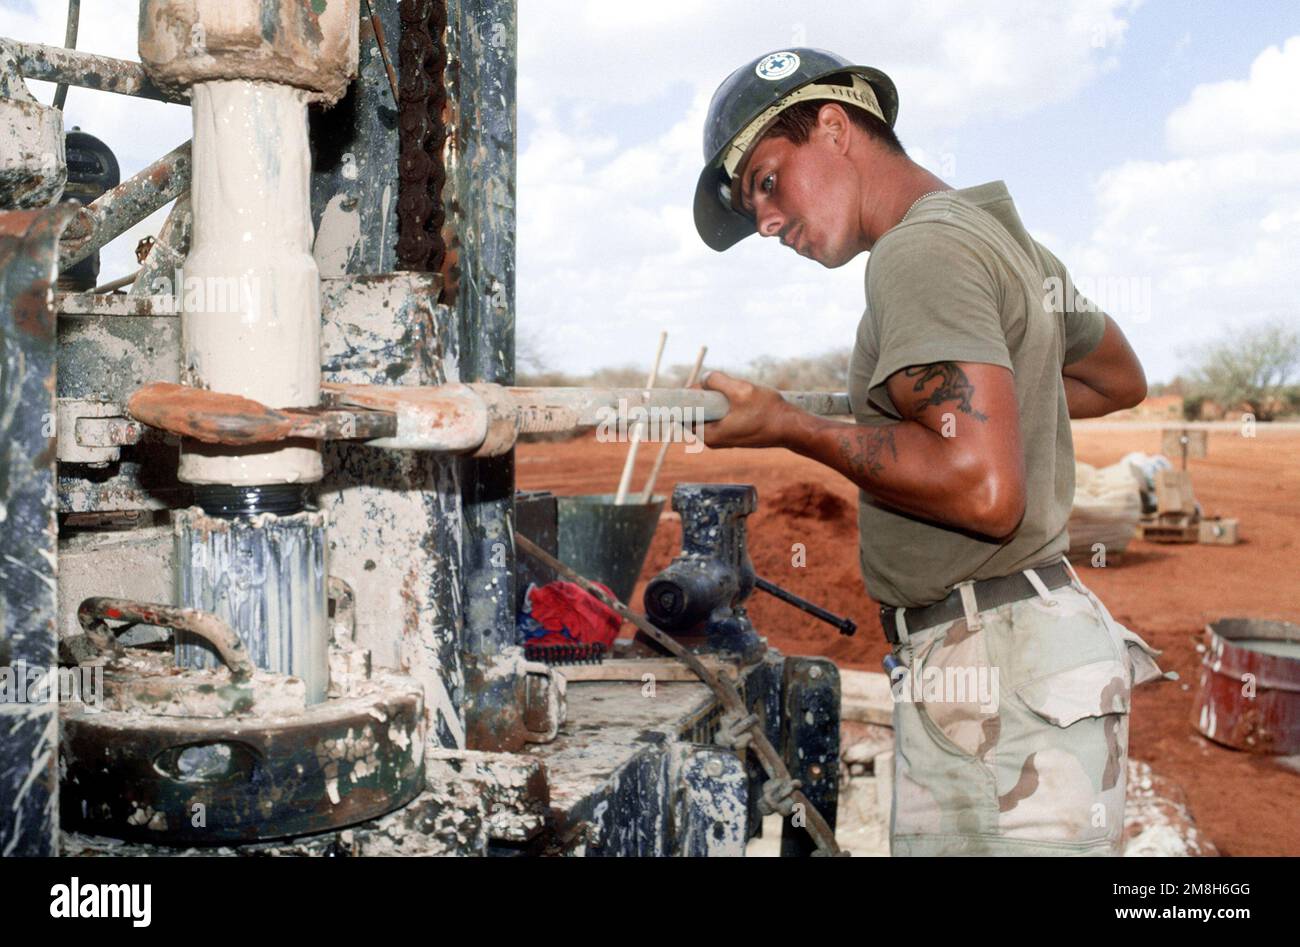 A member of Naval Mobile Construction Battalion 1 (NMCB-1) holds a section of drill shaft with a wrench while working on a mobile drilling rig being used to drill a water well. The well, near Bale Dogle, is intended to supply an old Soviet air base being used by U.S. and Moroccan personnel participating in the operation. Subject Operation/Series: RESTORE HOPE Country: Somalia (SOM) Stock Photo